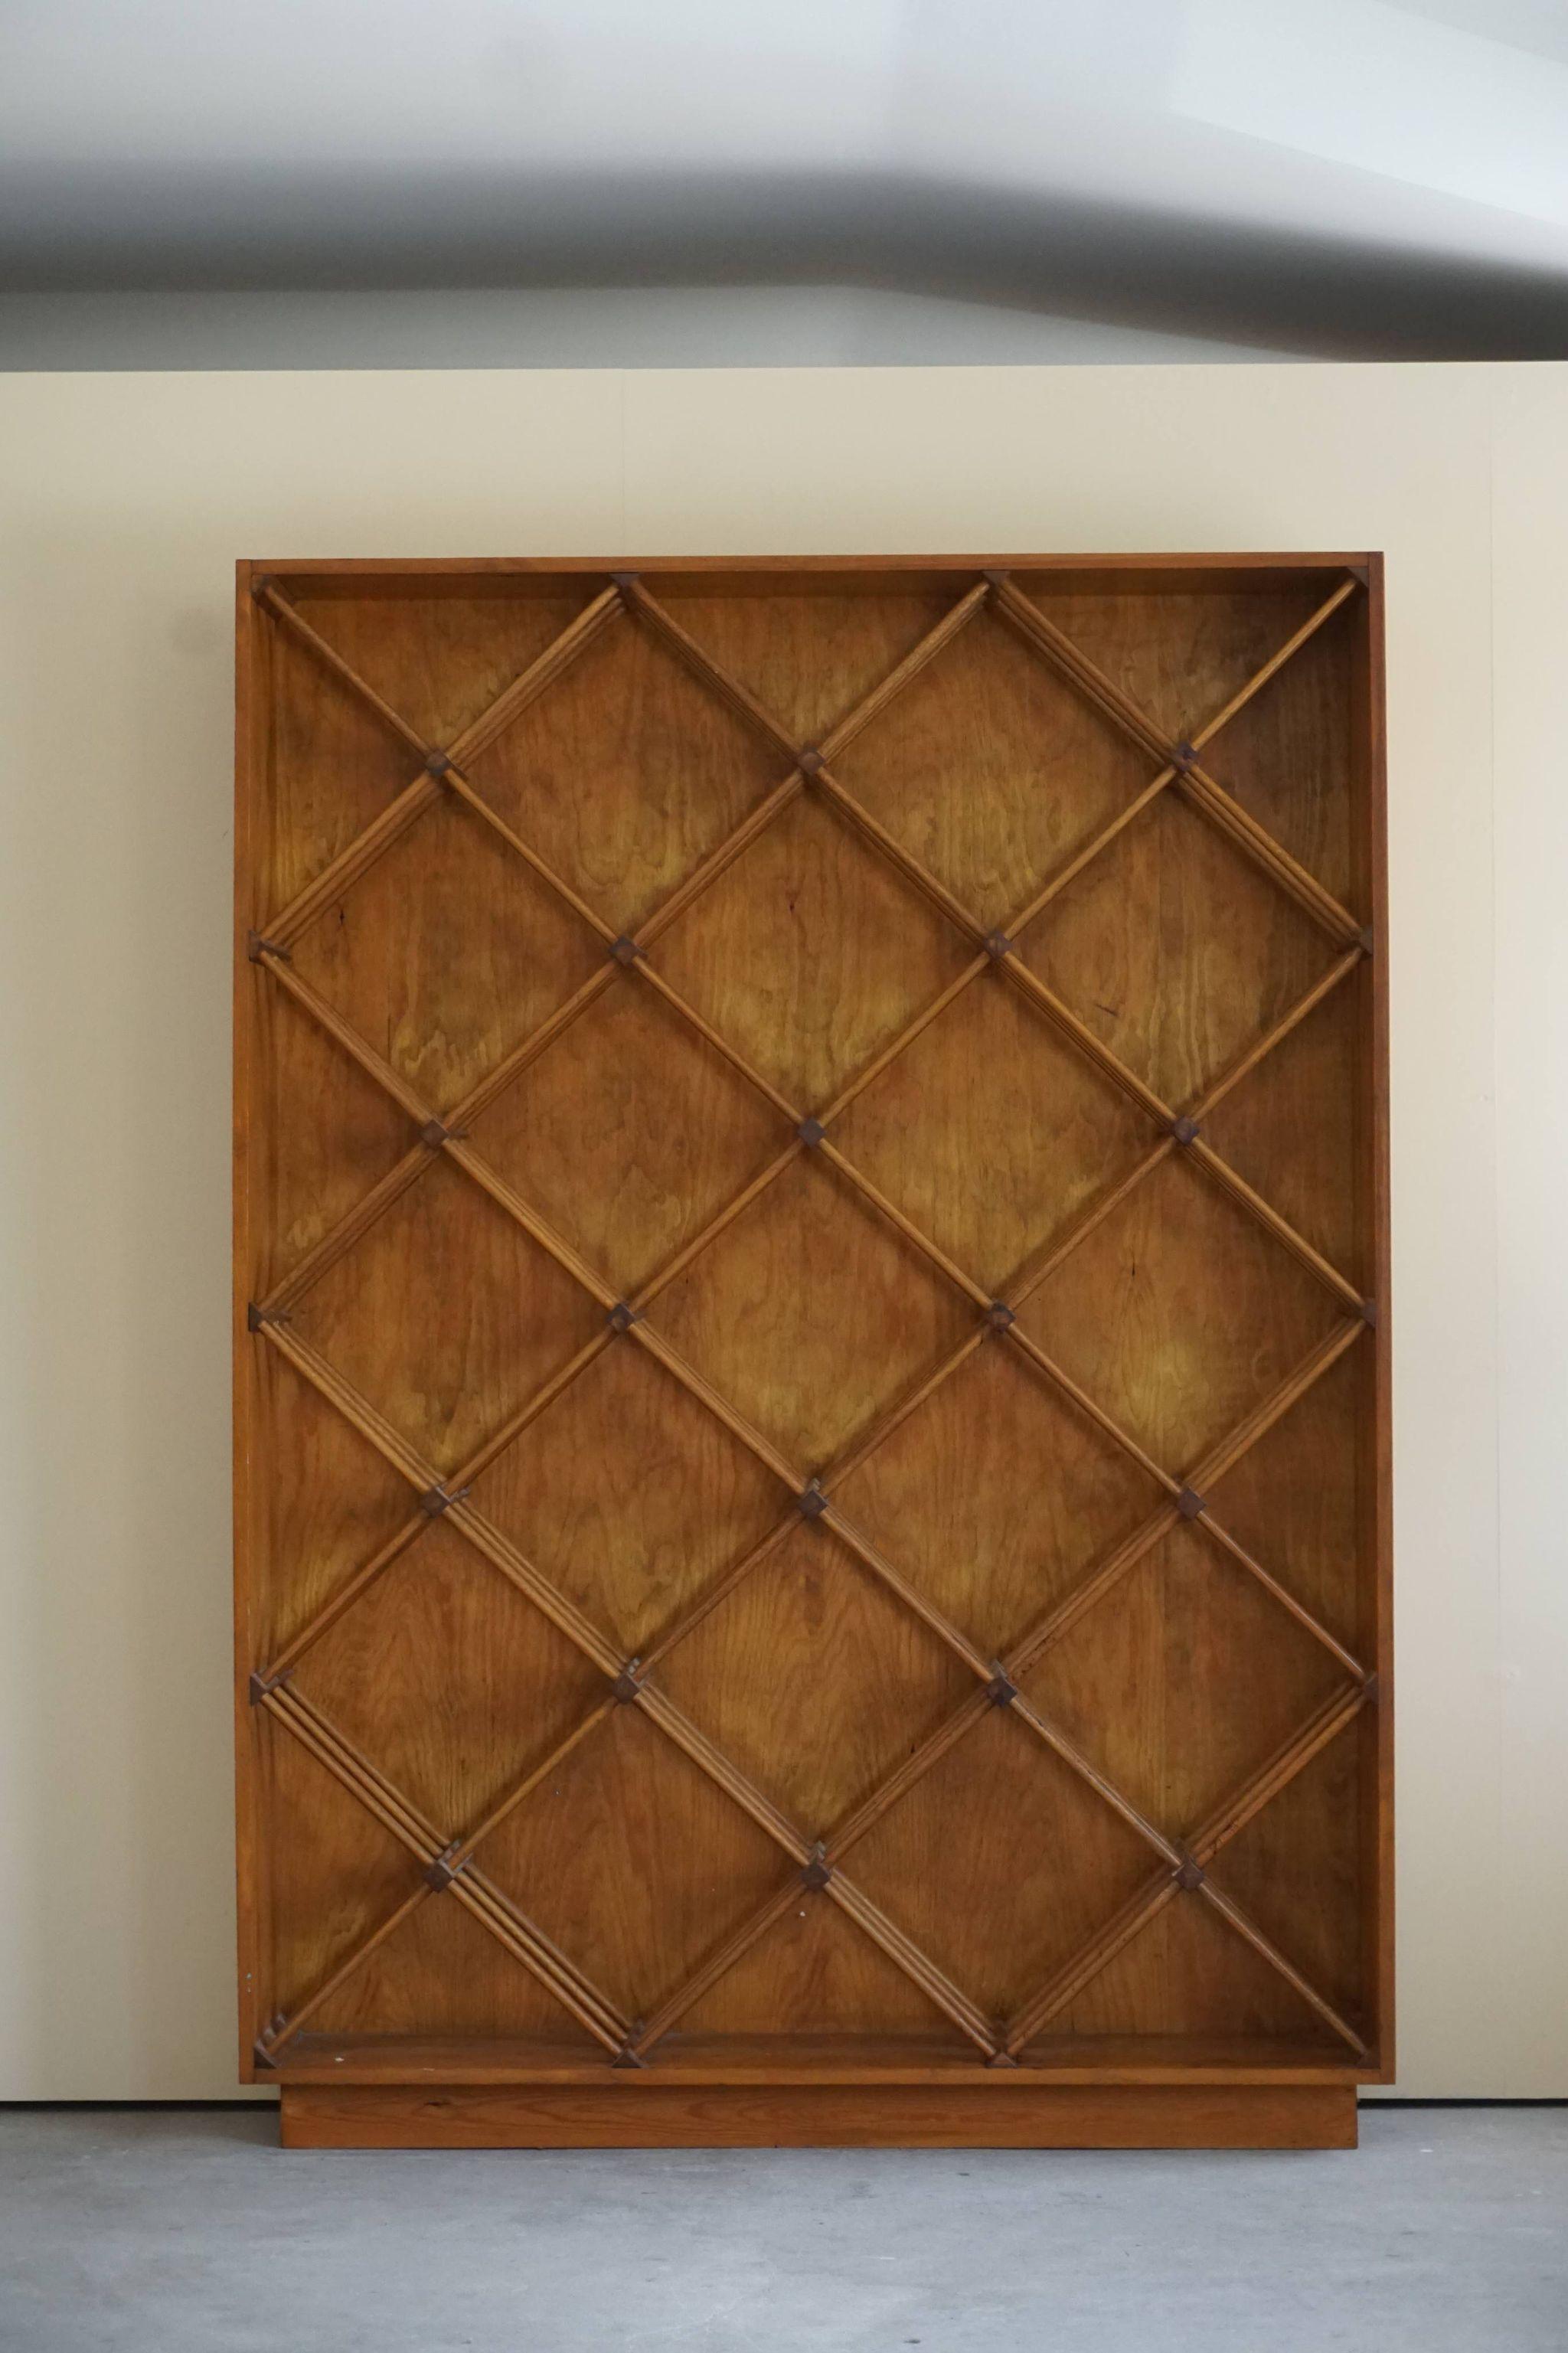 Huge late 20th century vintage Scandinavian wine rack in oak and pine, 1970s.
Can be used a book shelve/room divider as well.
Incredible sculptural piece in a good condition.